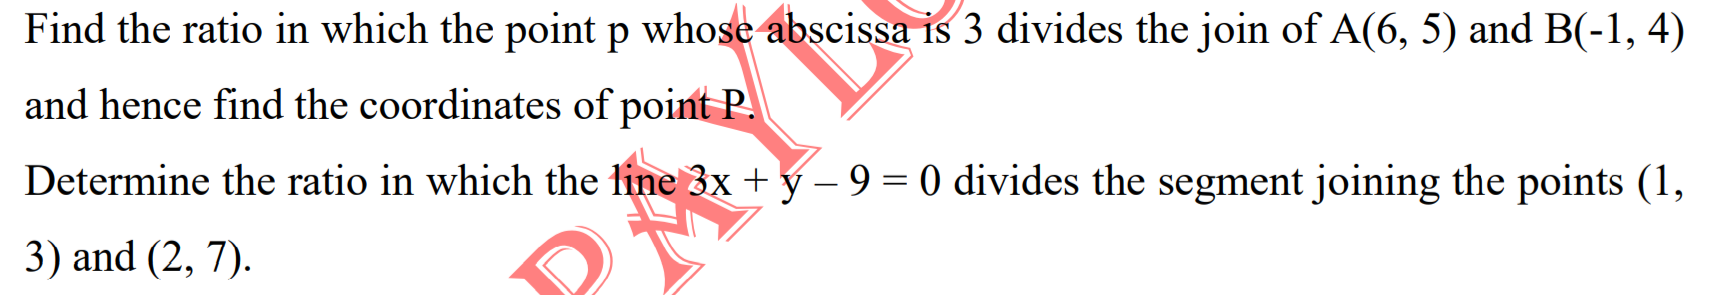 Find the ratio in which the point p whose abscissa is 3 divides the join of A(6, 5) and B(-1, 4)
and hence find the coordinates of point P!
Determine the ratio in which the line 3x + y – 9 = 0 divides the segment joining the points (1,
3) and (2, 7).
